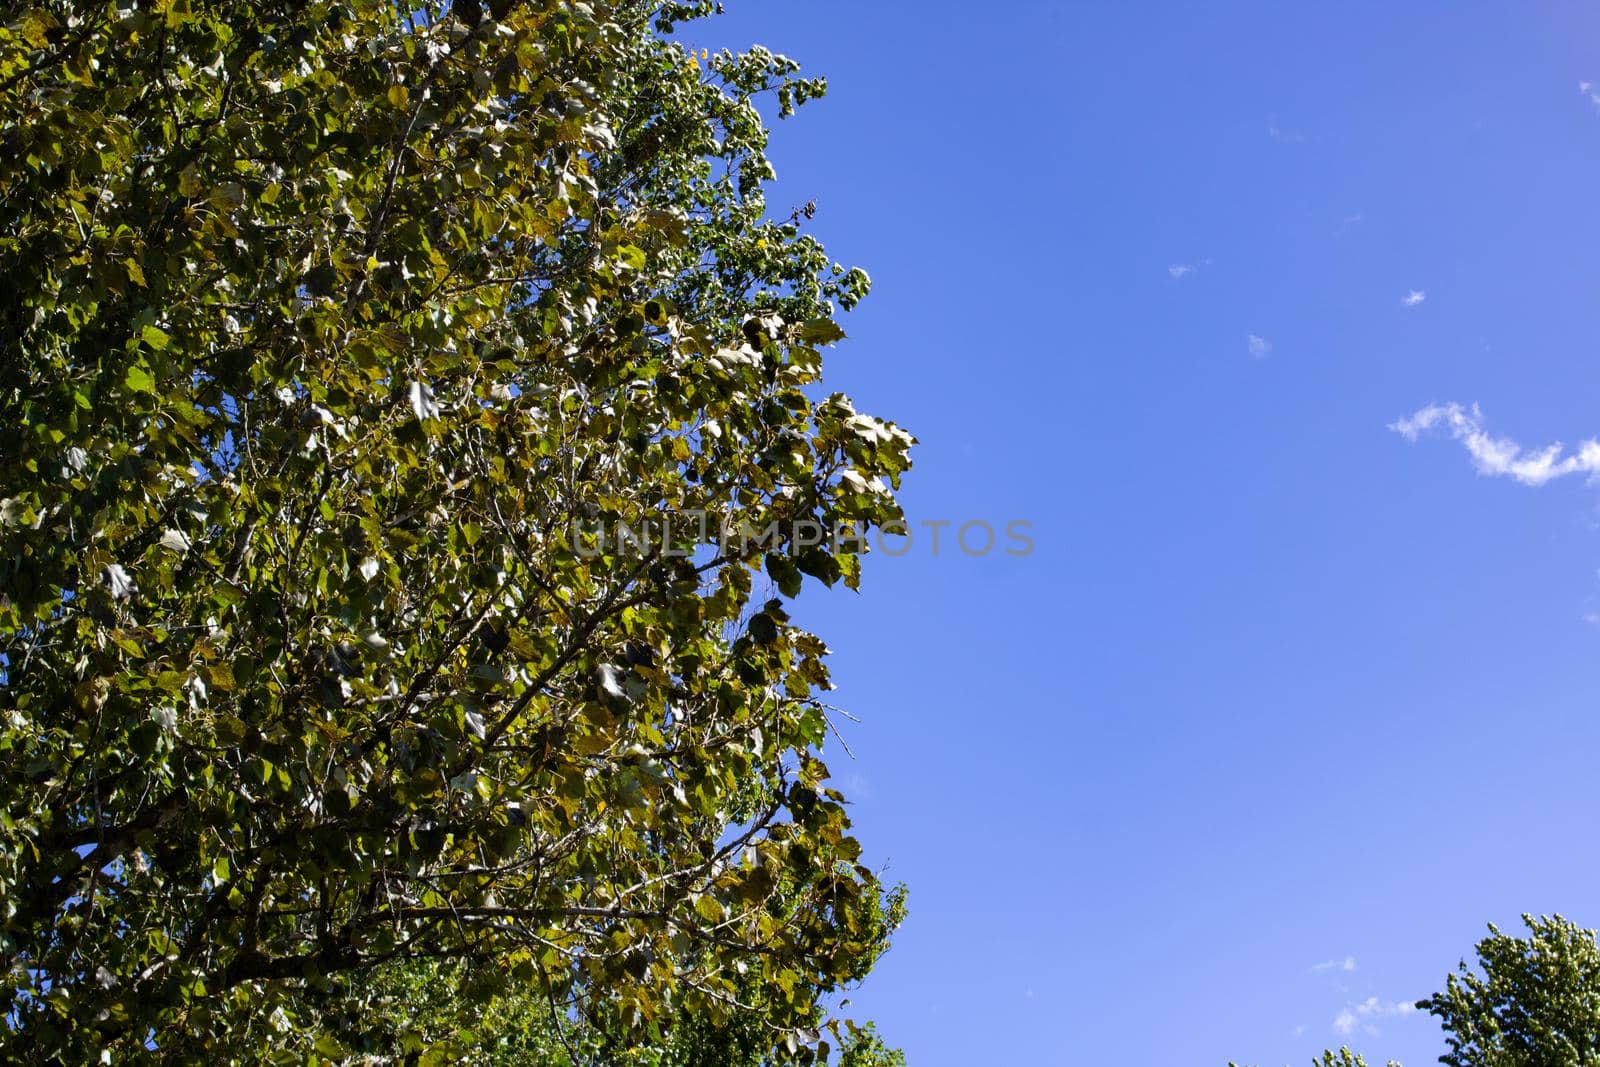 Green leaves on tree branches against blue sky, copy space